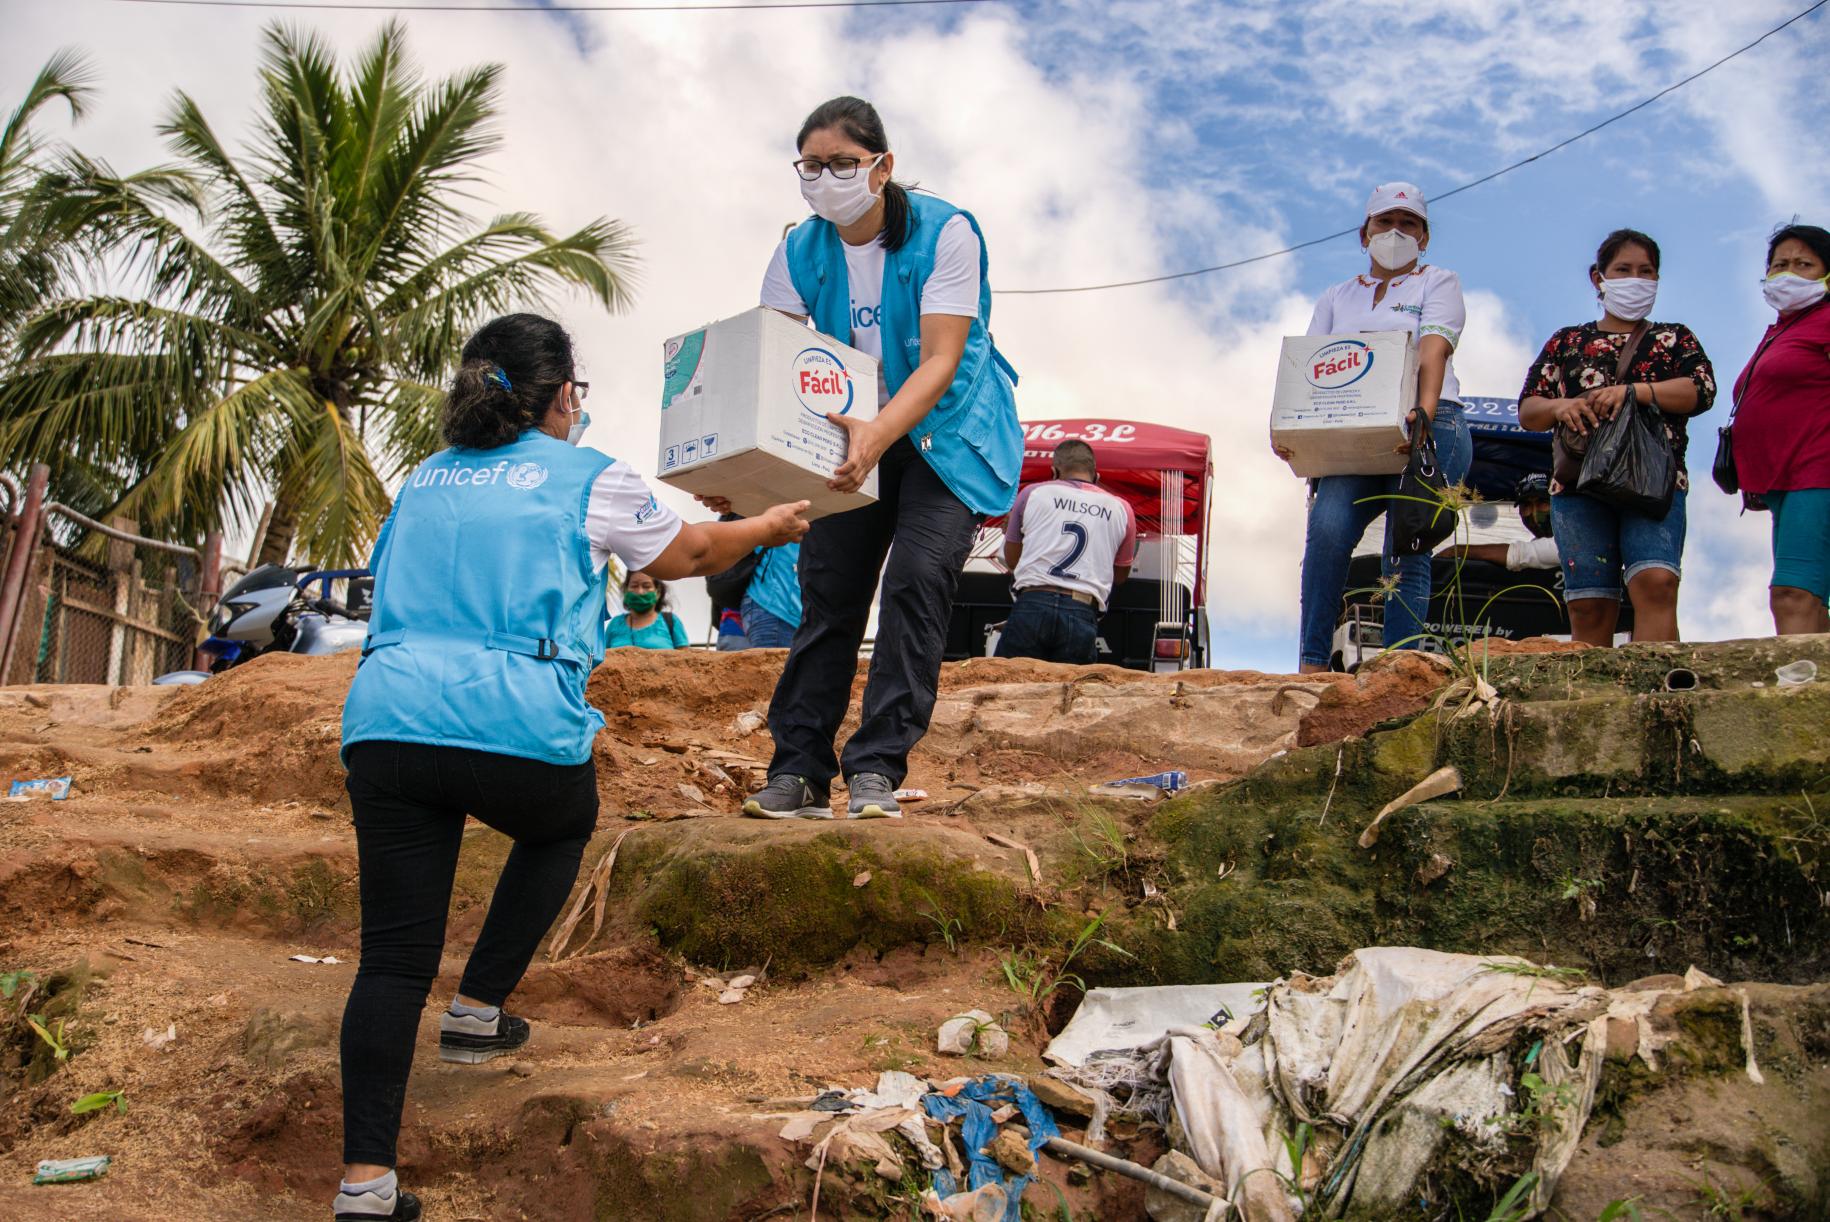 UN Staff carry boxes of supplies to communities in remote areas of Peru.